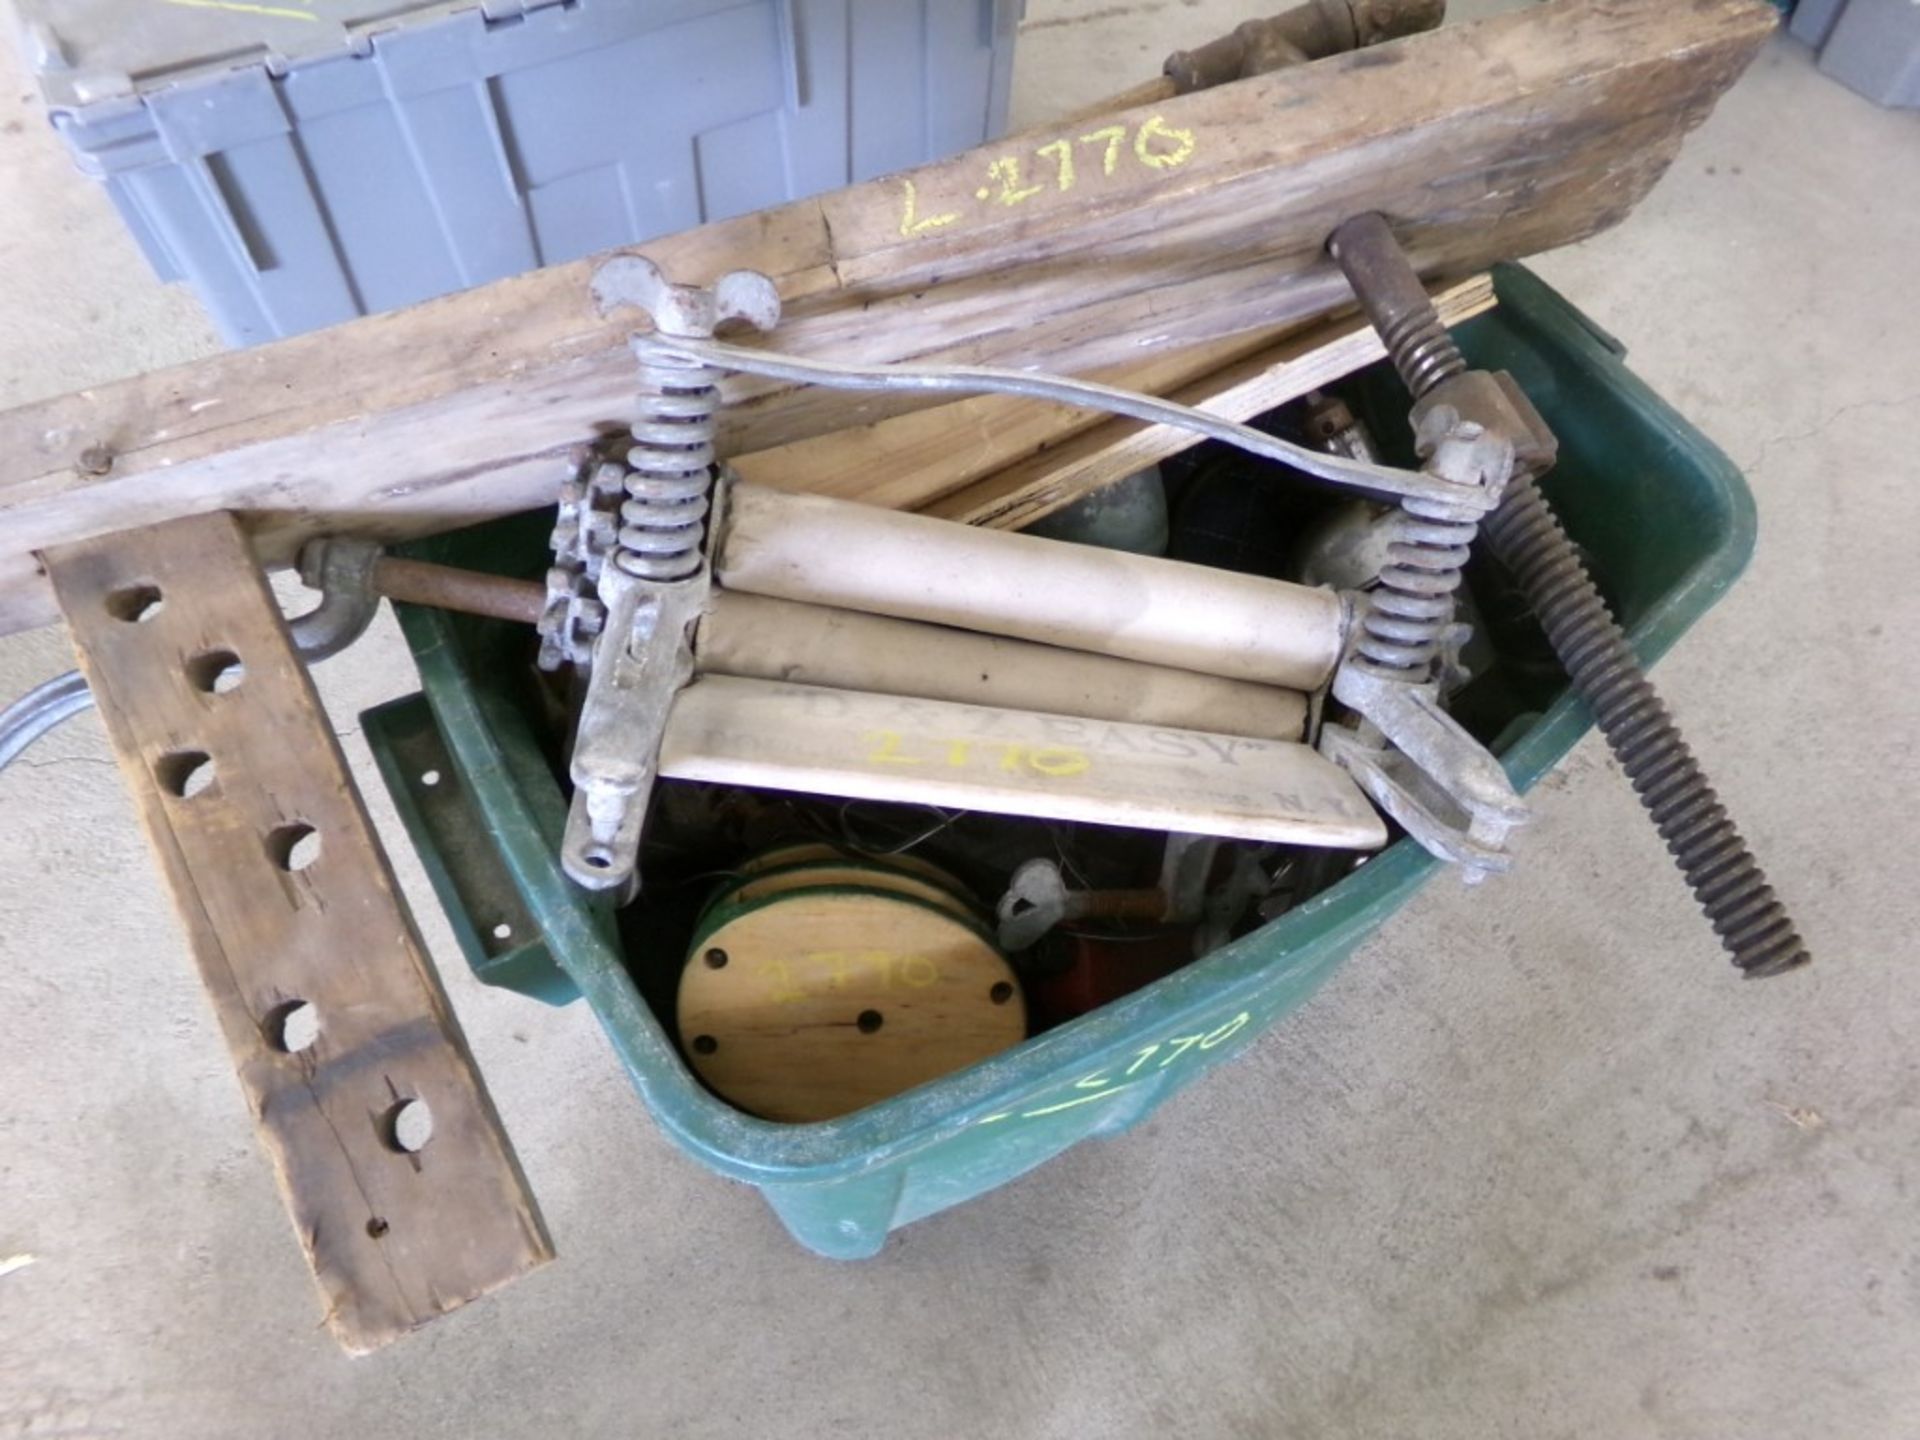 Tote with Wooden Vise, Etc. (2770)